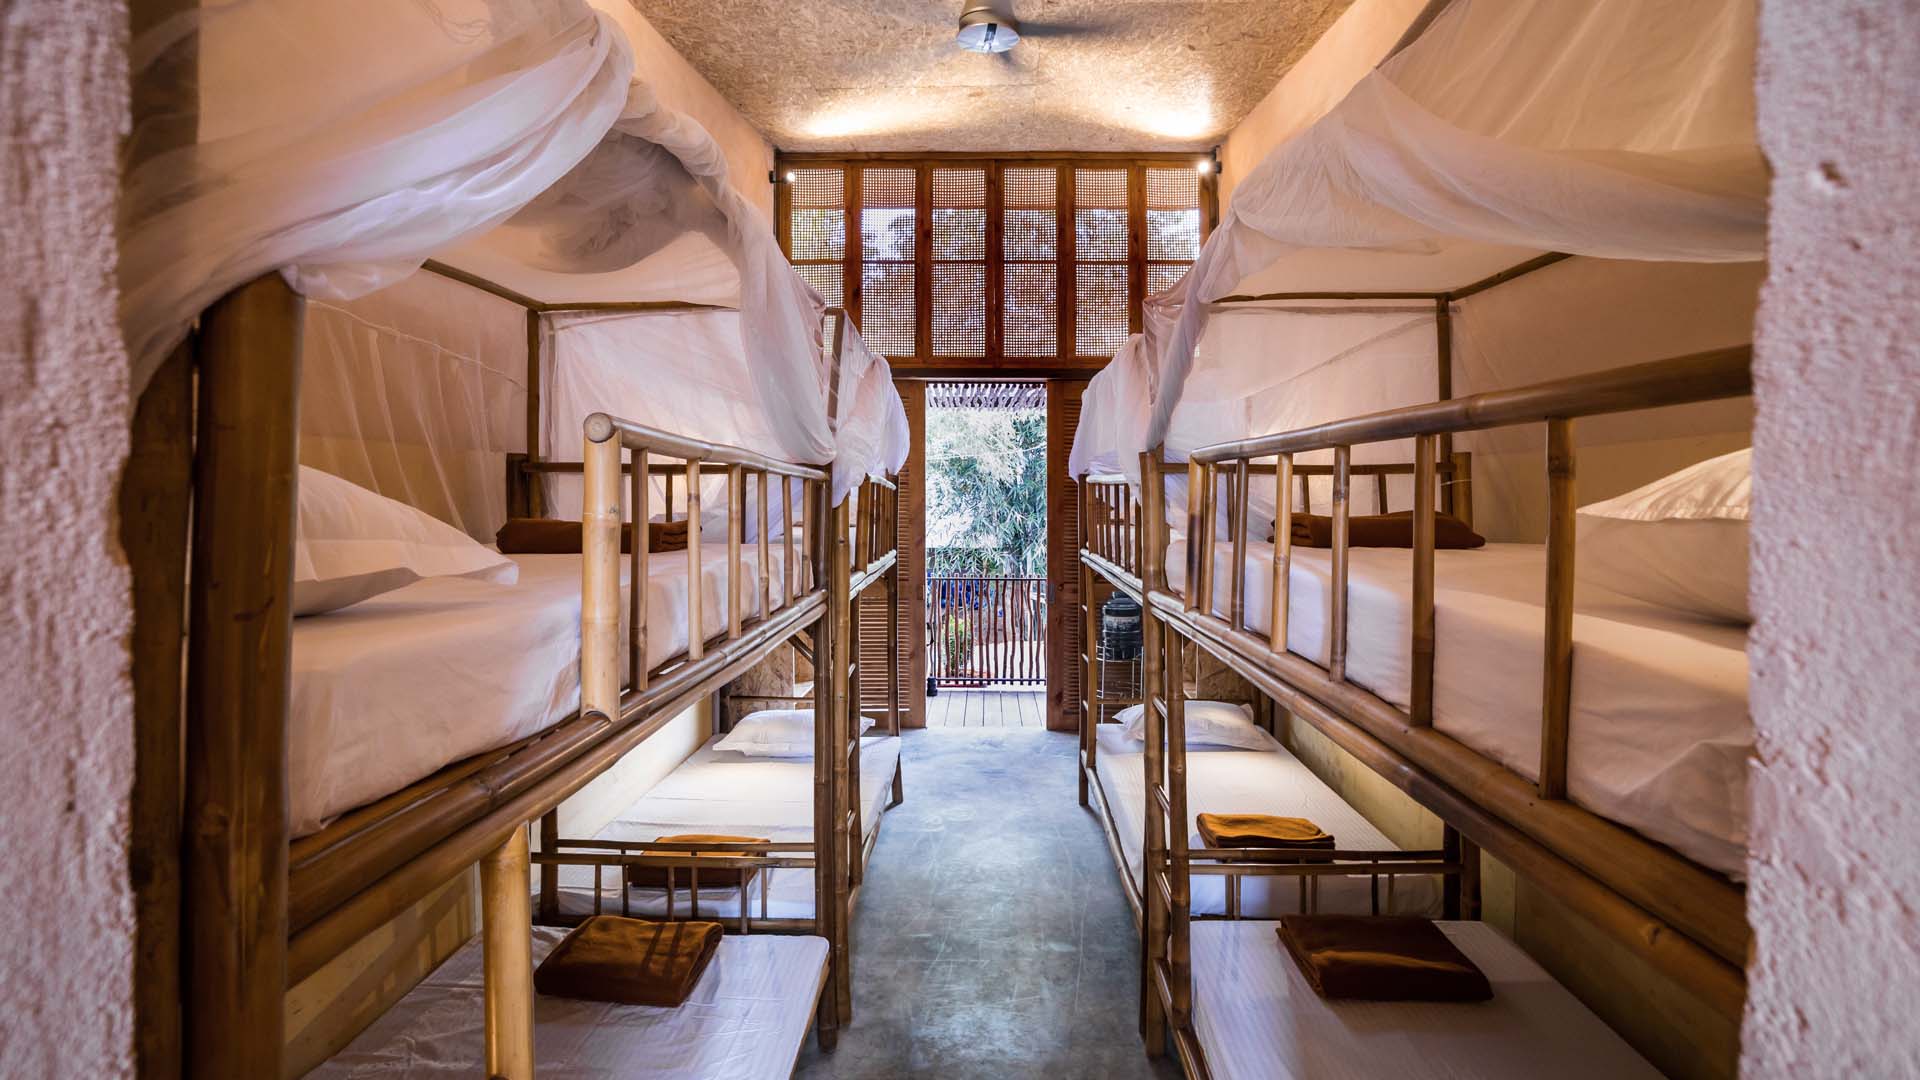 Hippo Farm Bioclimatic Dormitory; A Place to Reconnect with Nature